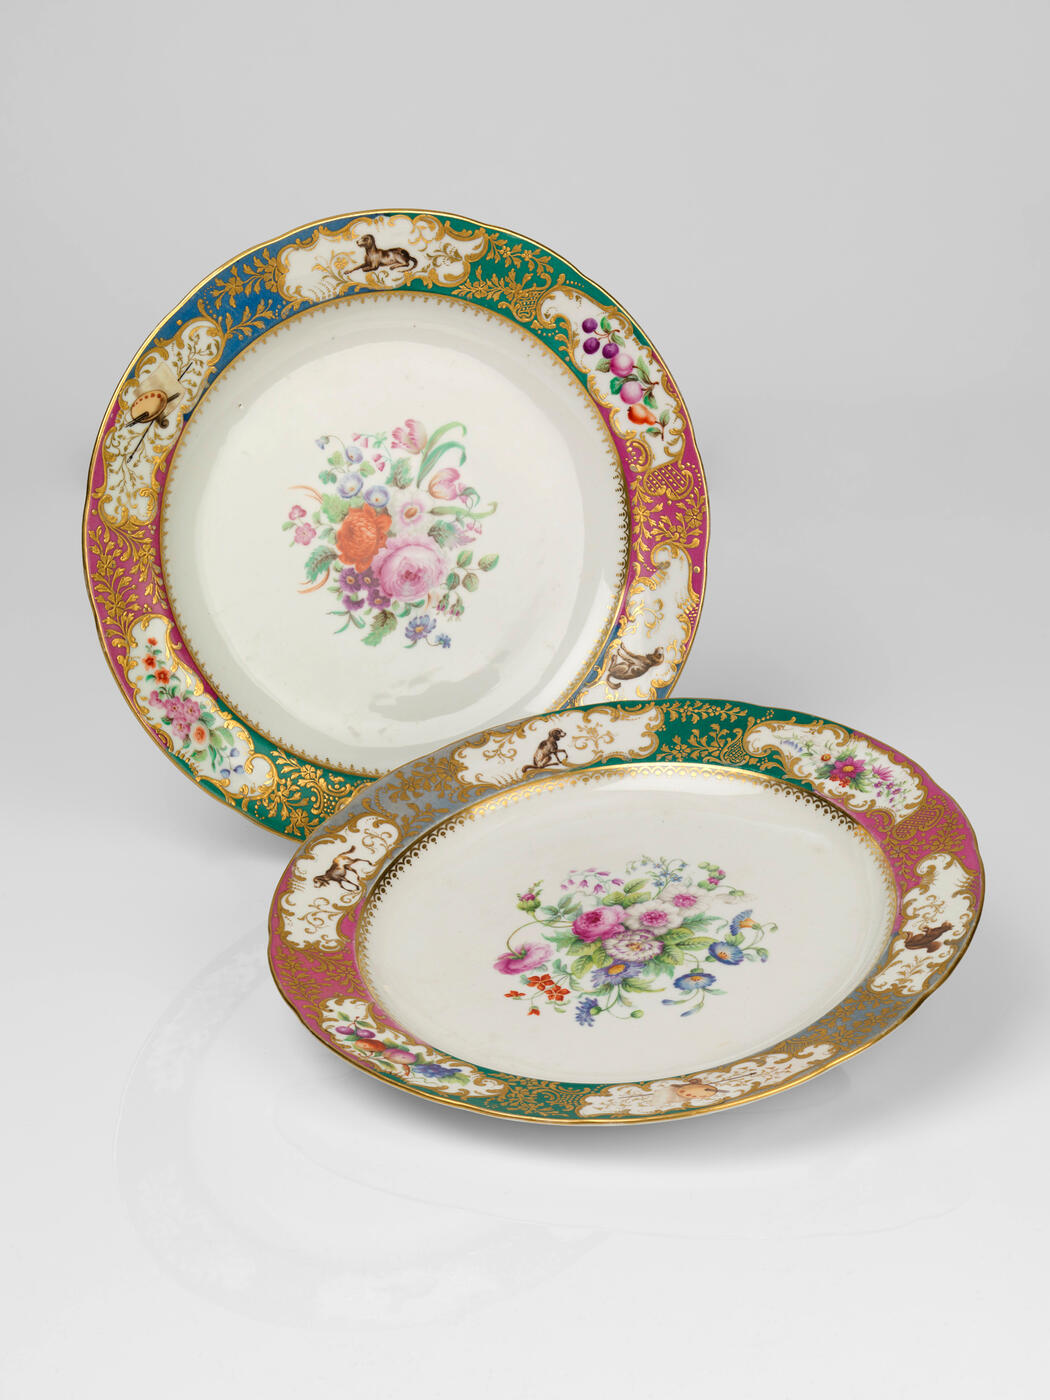 A Pair of Large Porcelain Platters from the Grand Duke Mikhail Pavlovich Service